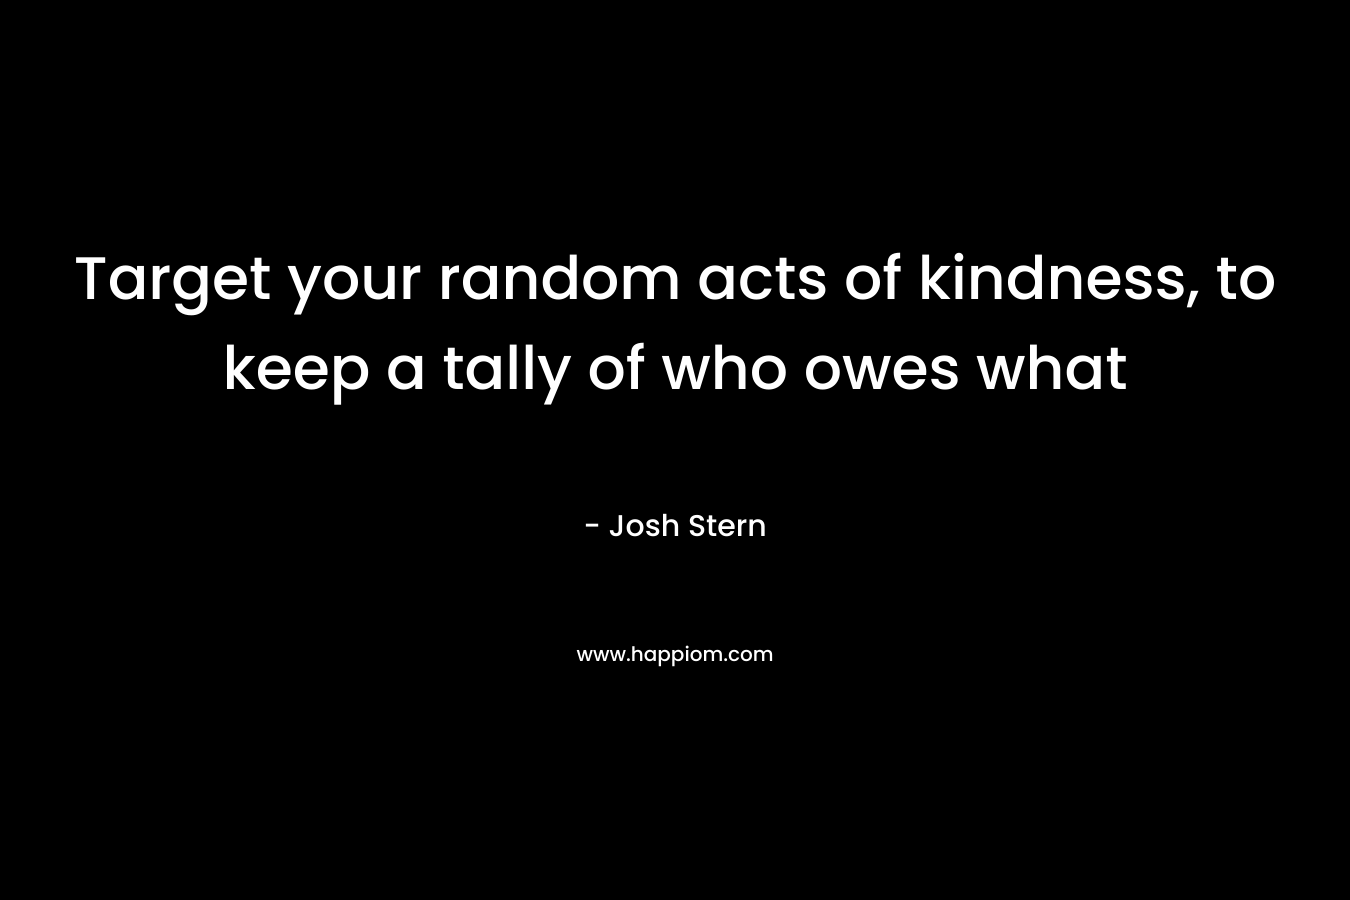 Target your random acts of kindness, to keep a tally of who owes what